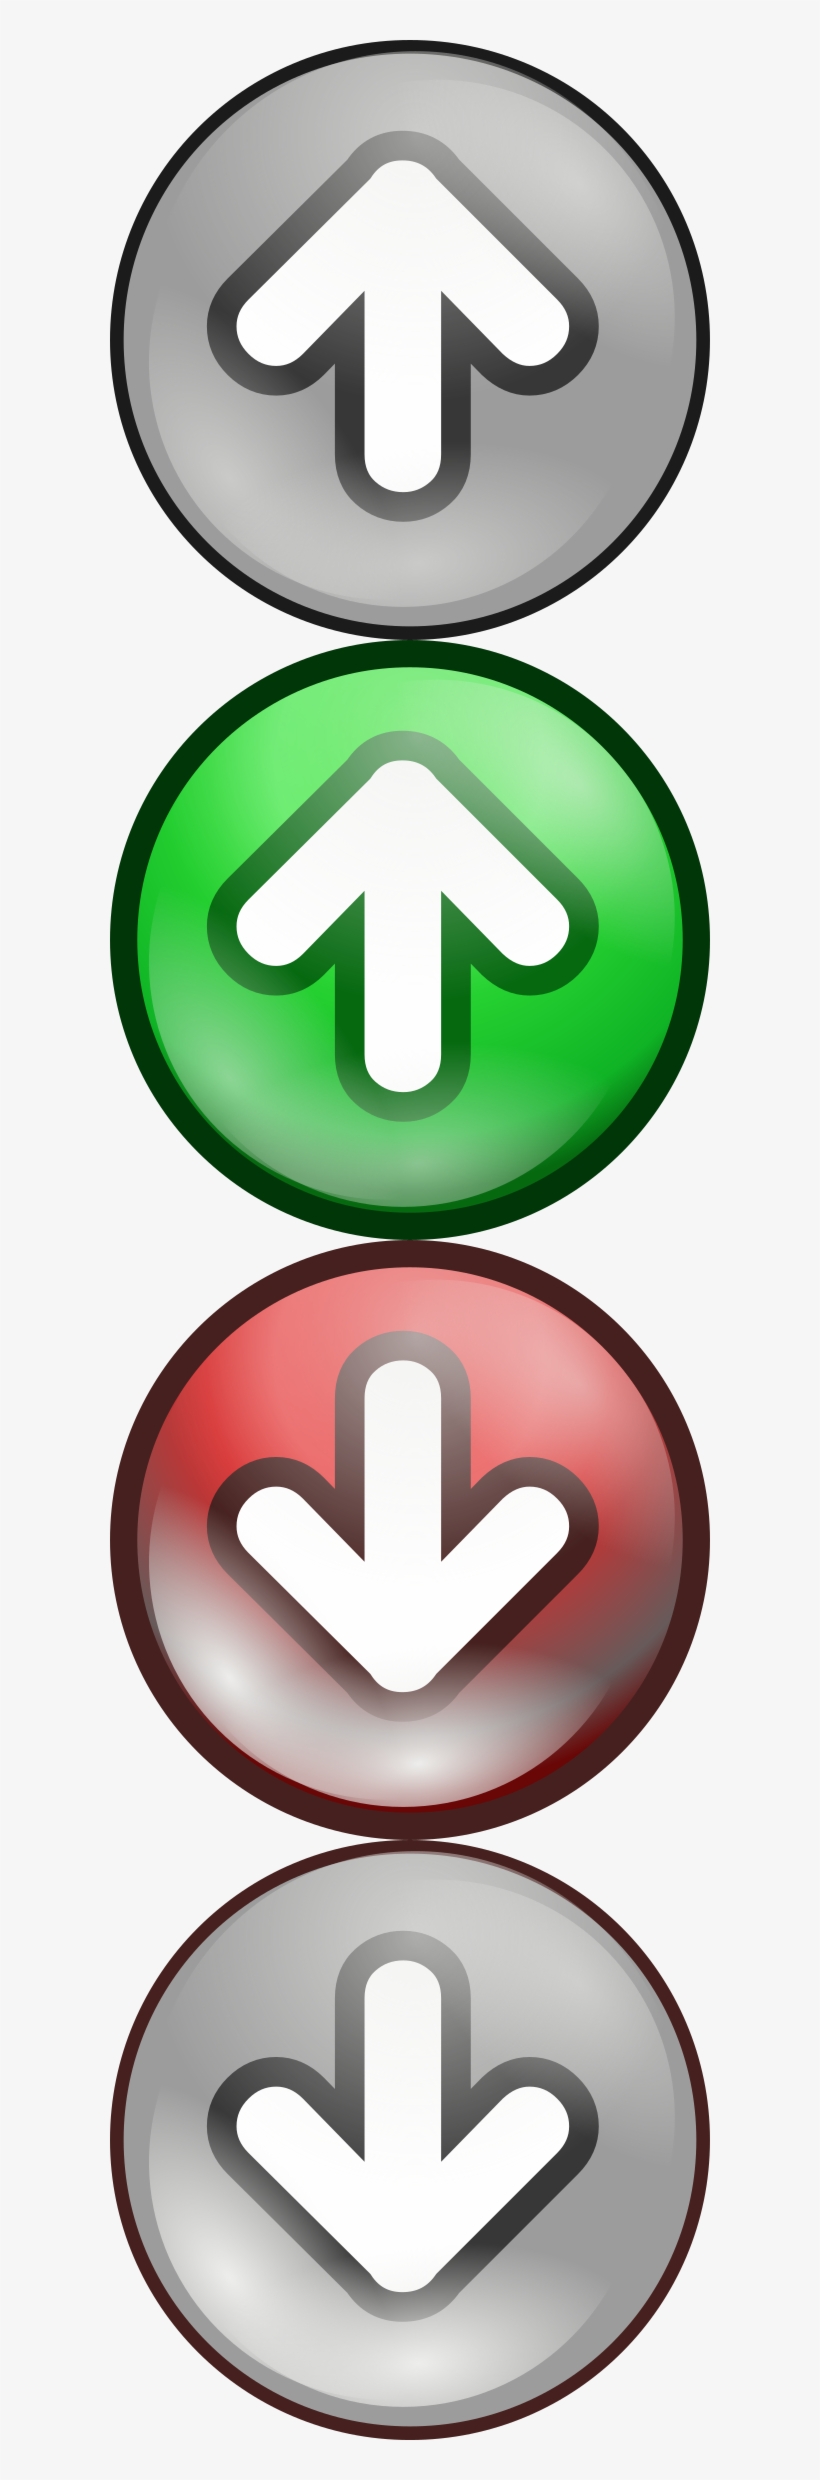 This Free Icons Png Design Of Shiny Green/red Voting, transparent png #6707278